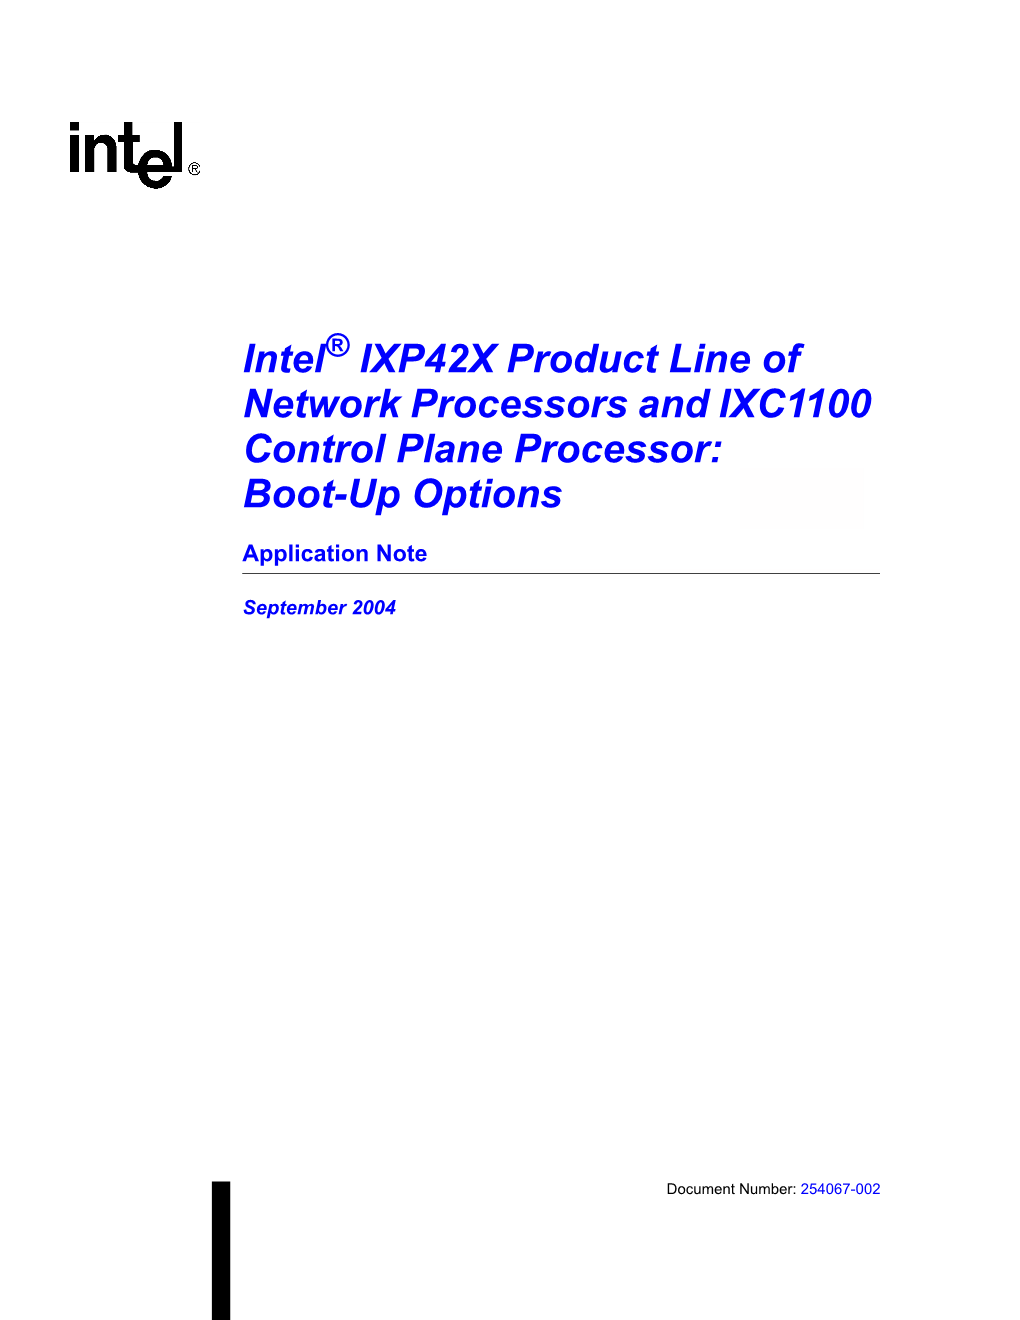 Intel® IXP42X Product Line of Network Processors and IXC1100 Control Plane Processor: Boot-Up Options